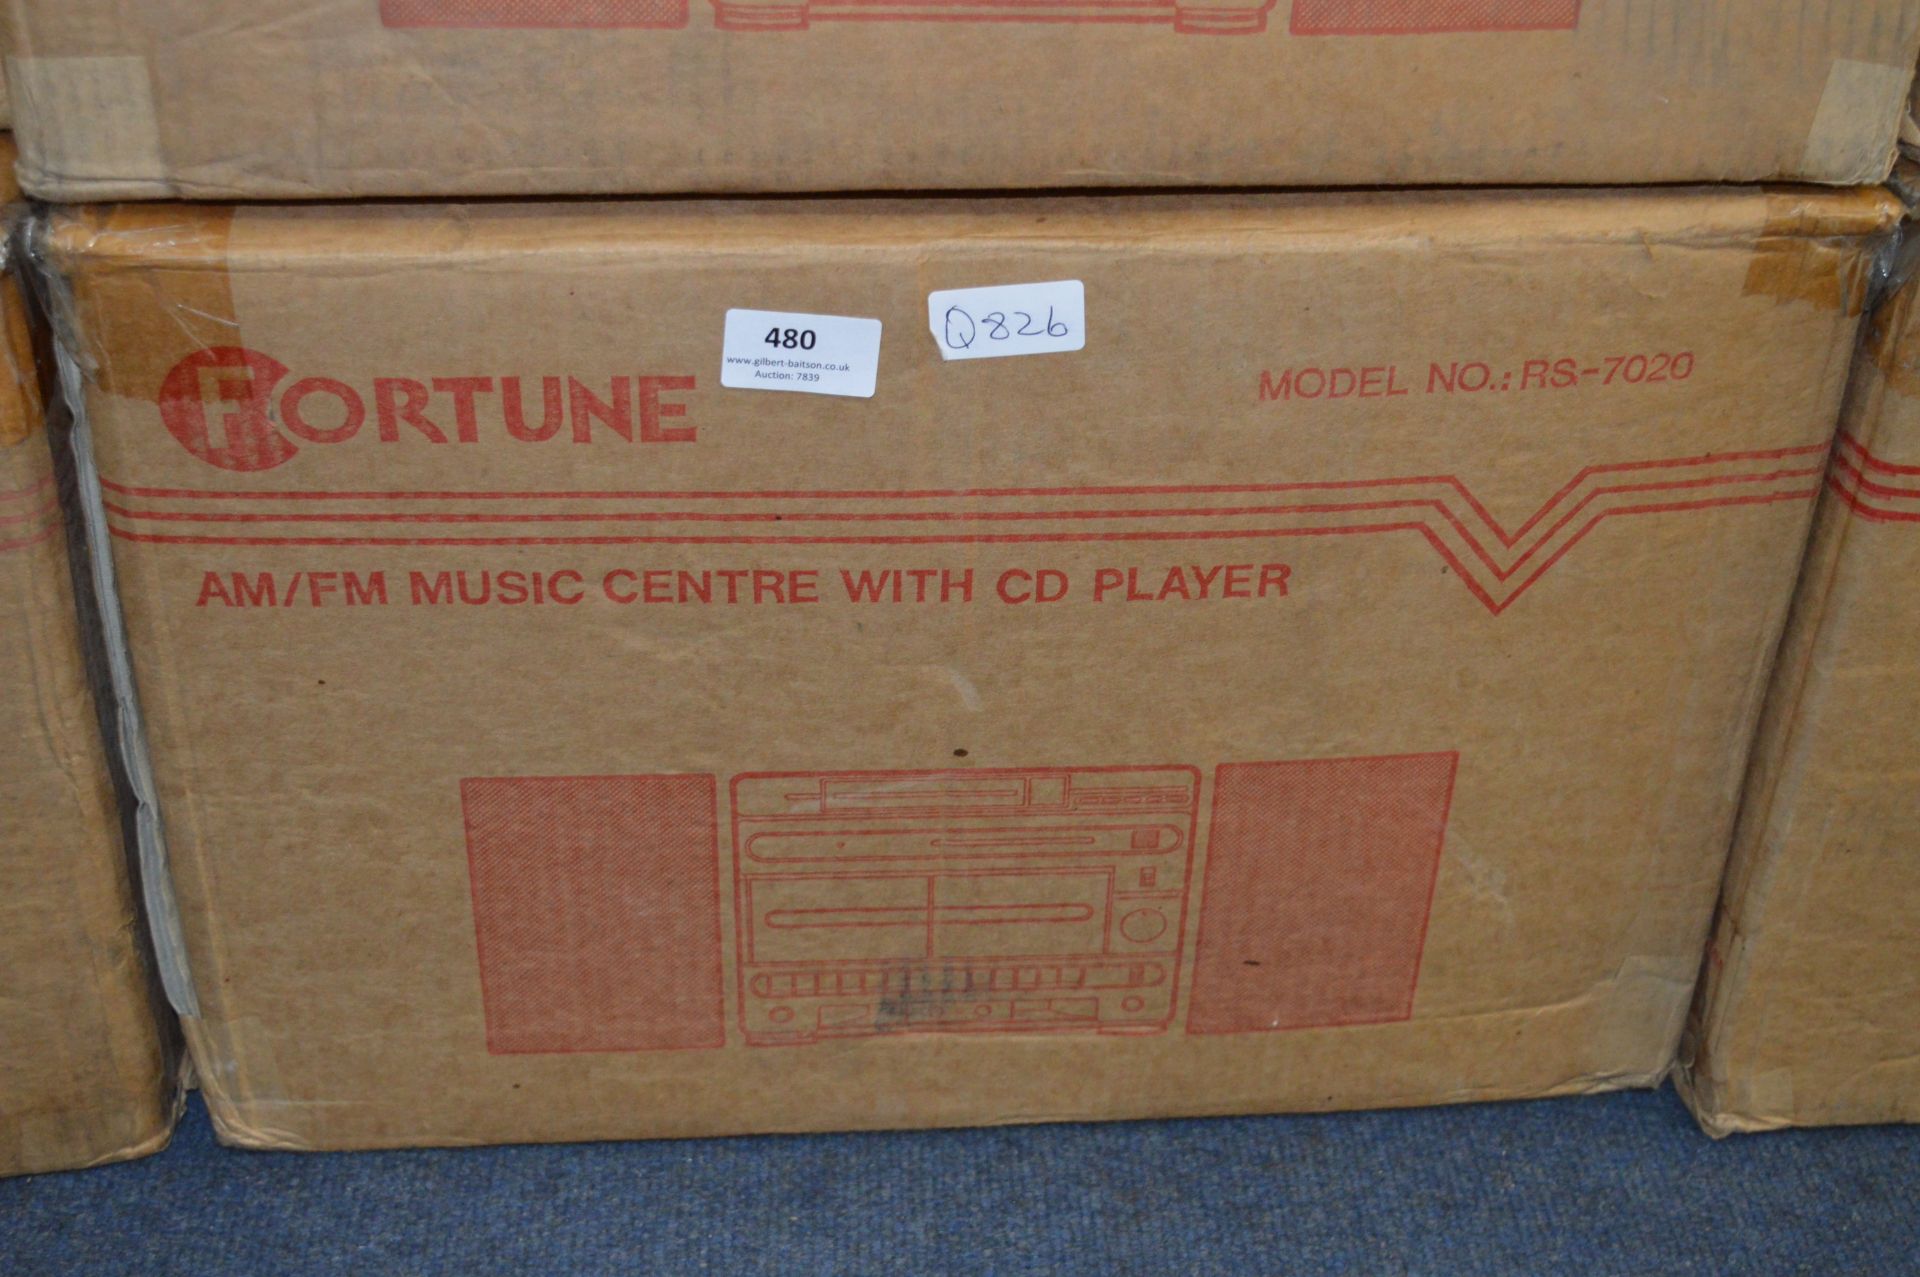 Fortune AM/FM Music Centre with CD Player